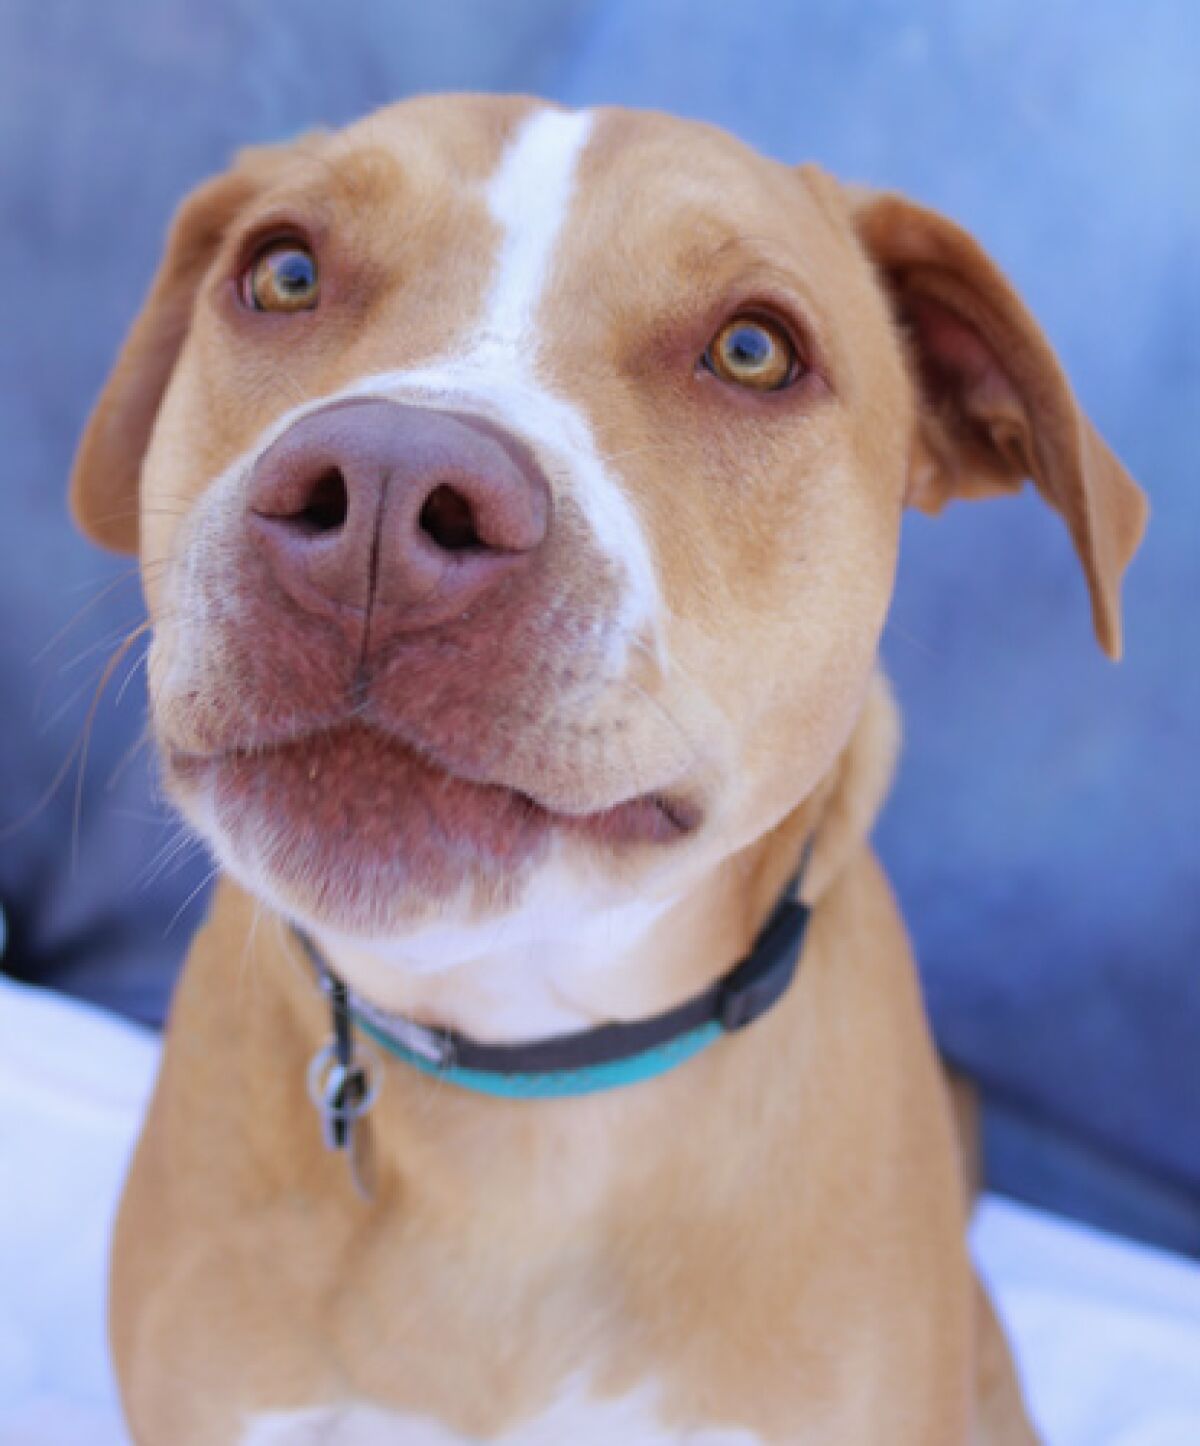 dommer Pak at lægge trappe Pet of the week is Labrador retriever/pit bull mix - The San Diego  Union-Tribune